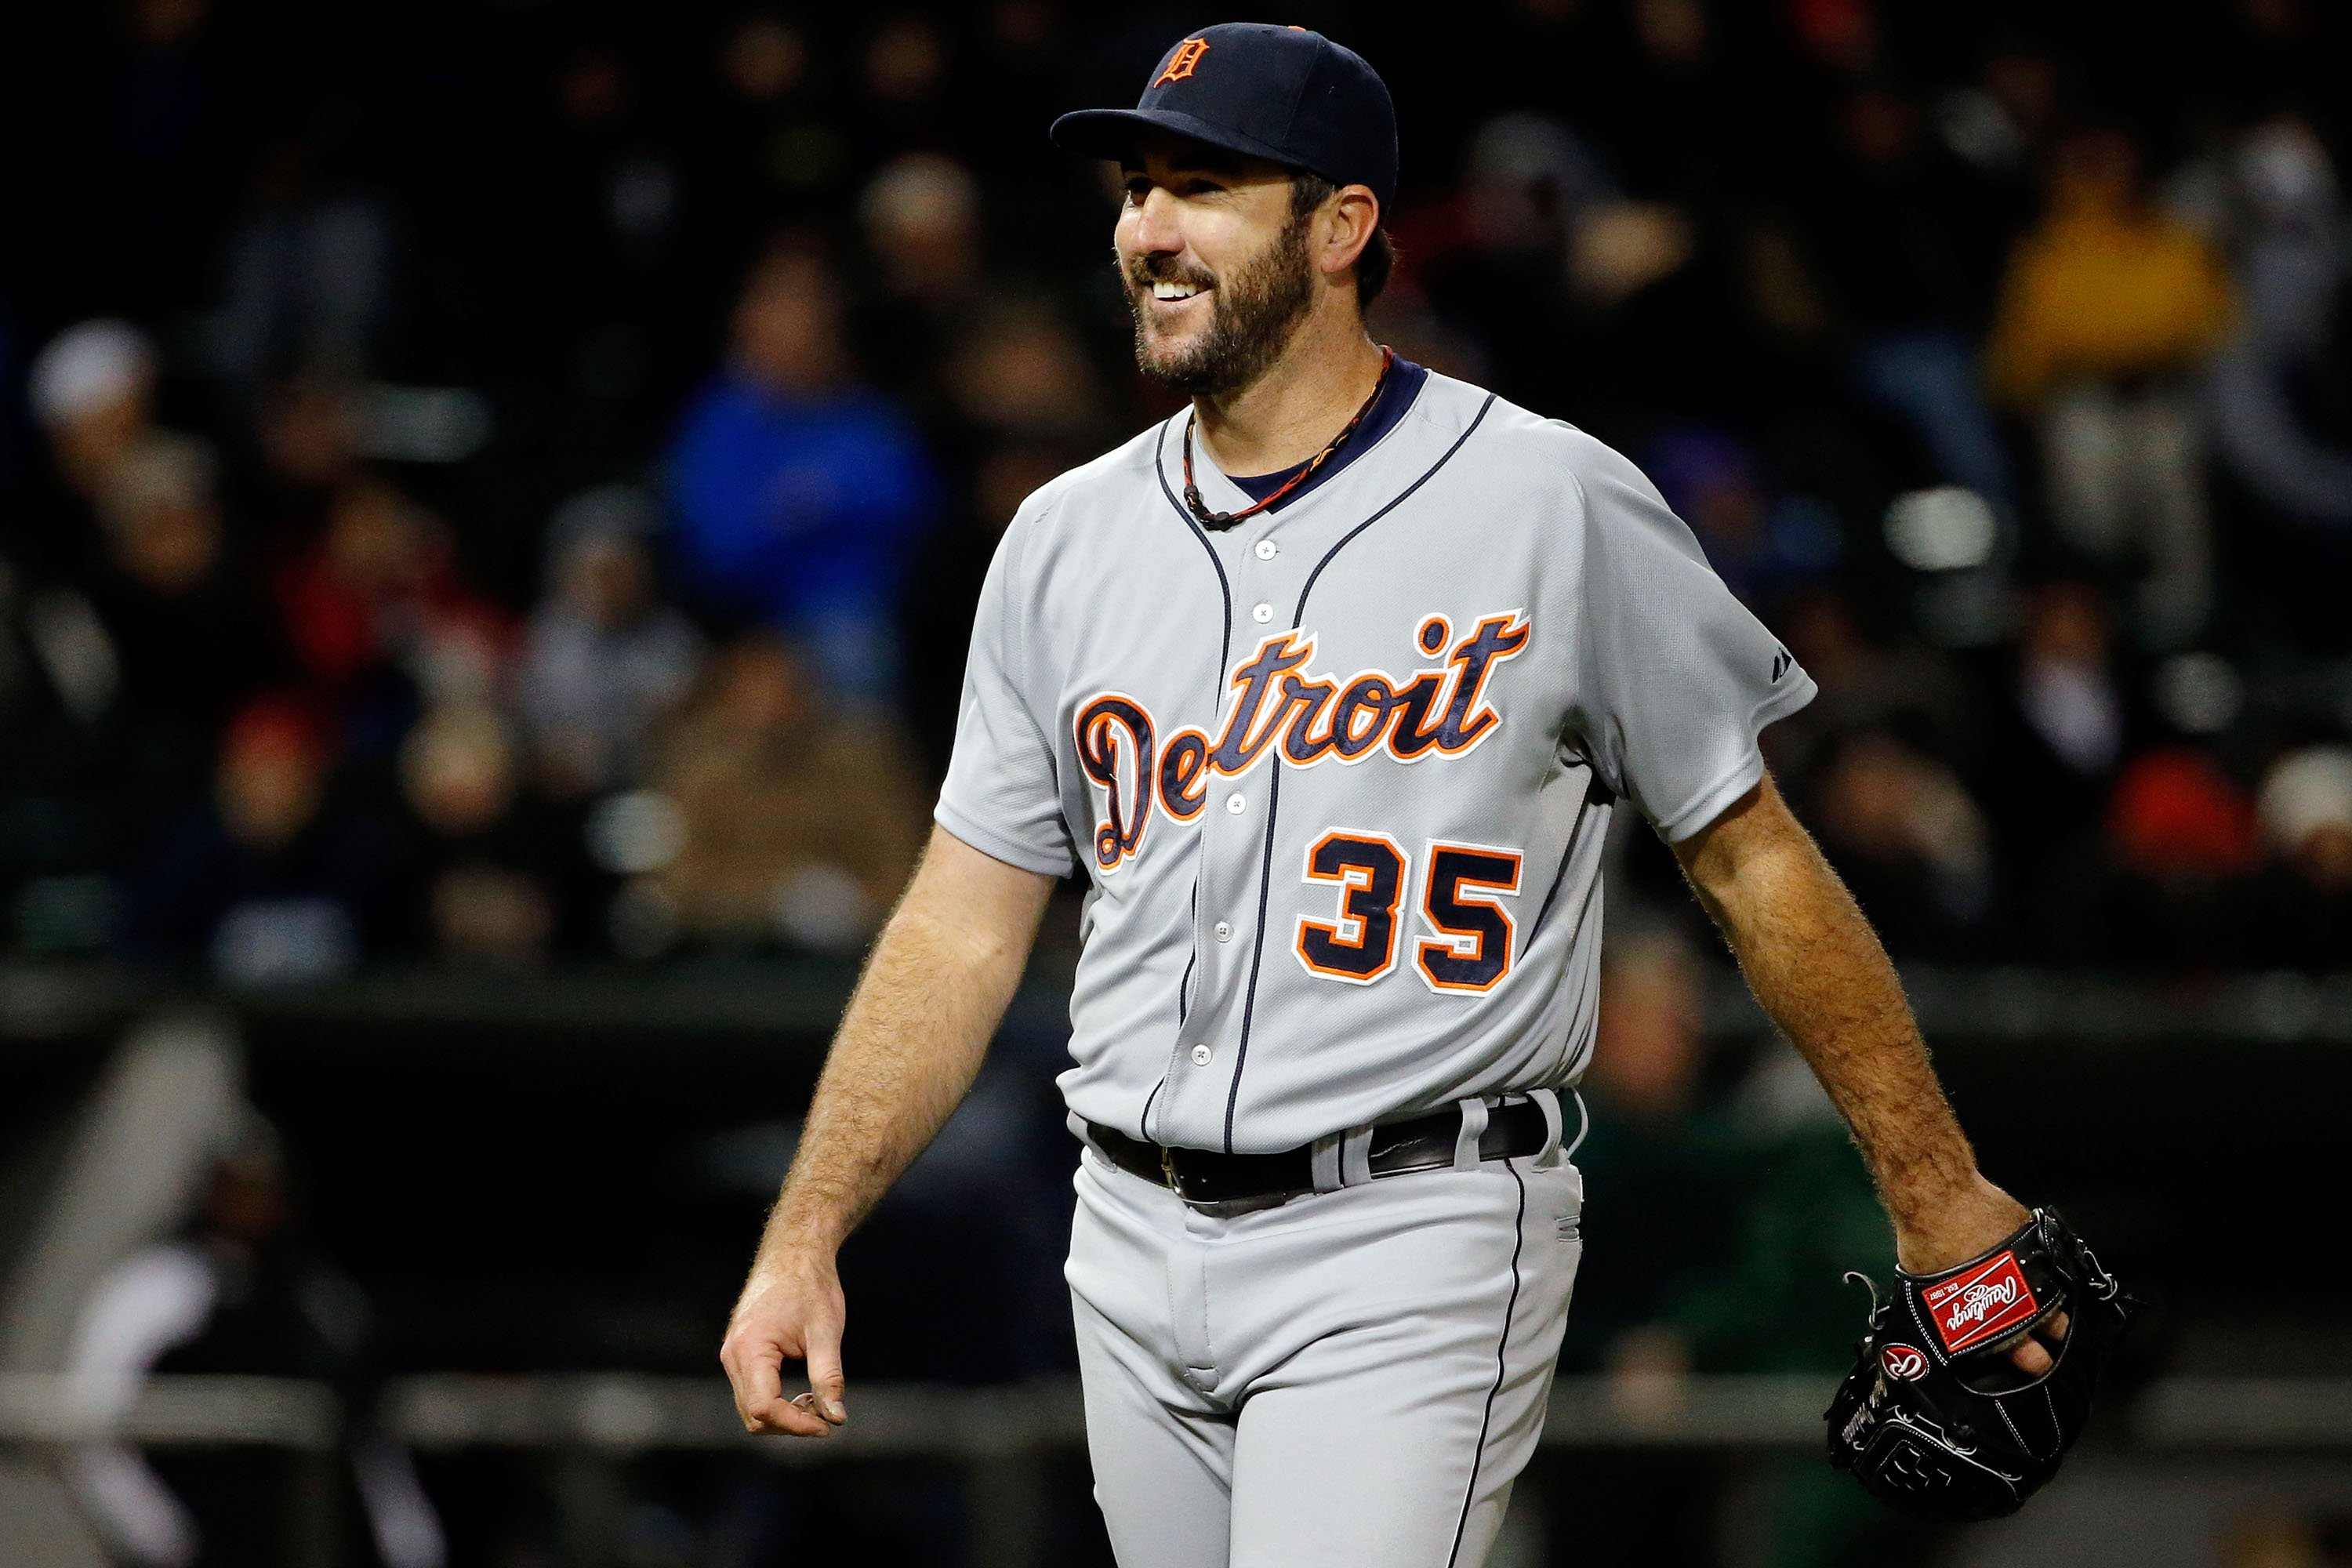 Detroit Tigers' Justin Verlander wins American League Cy Young in